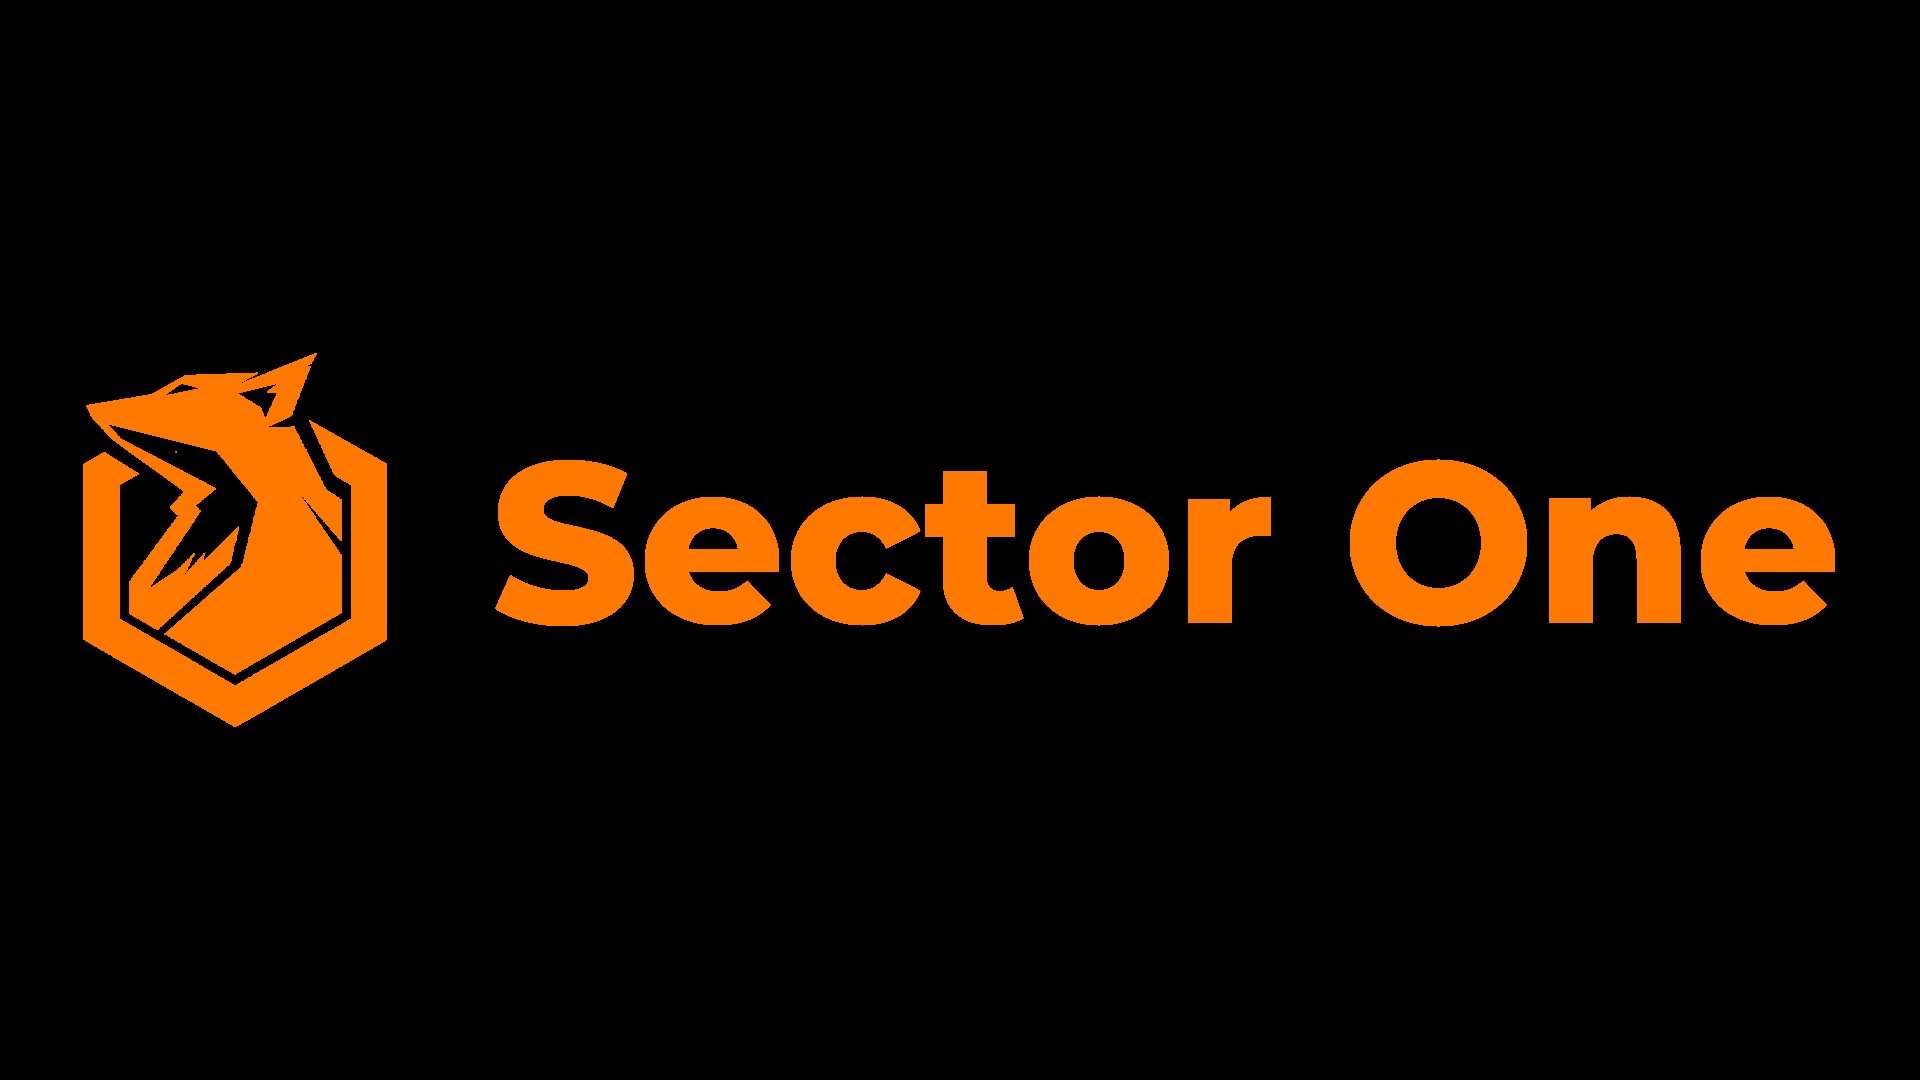 Sector One logo